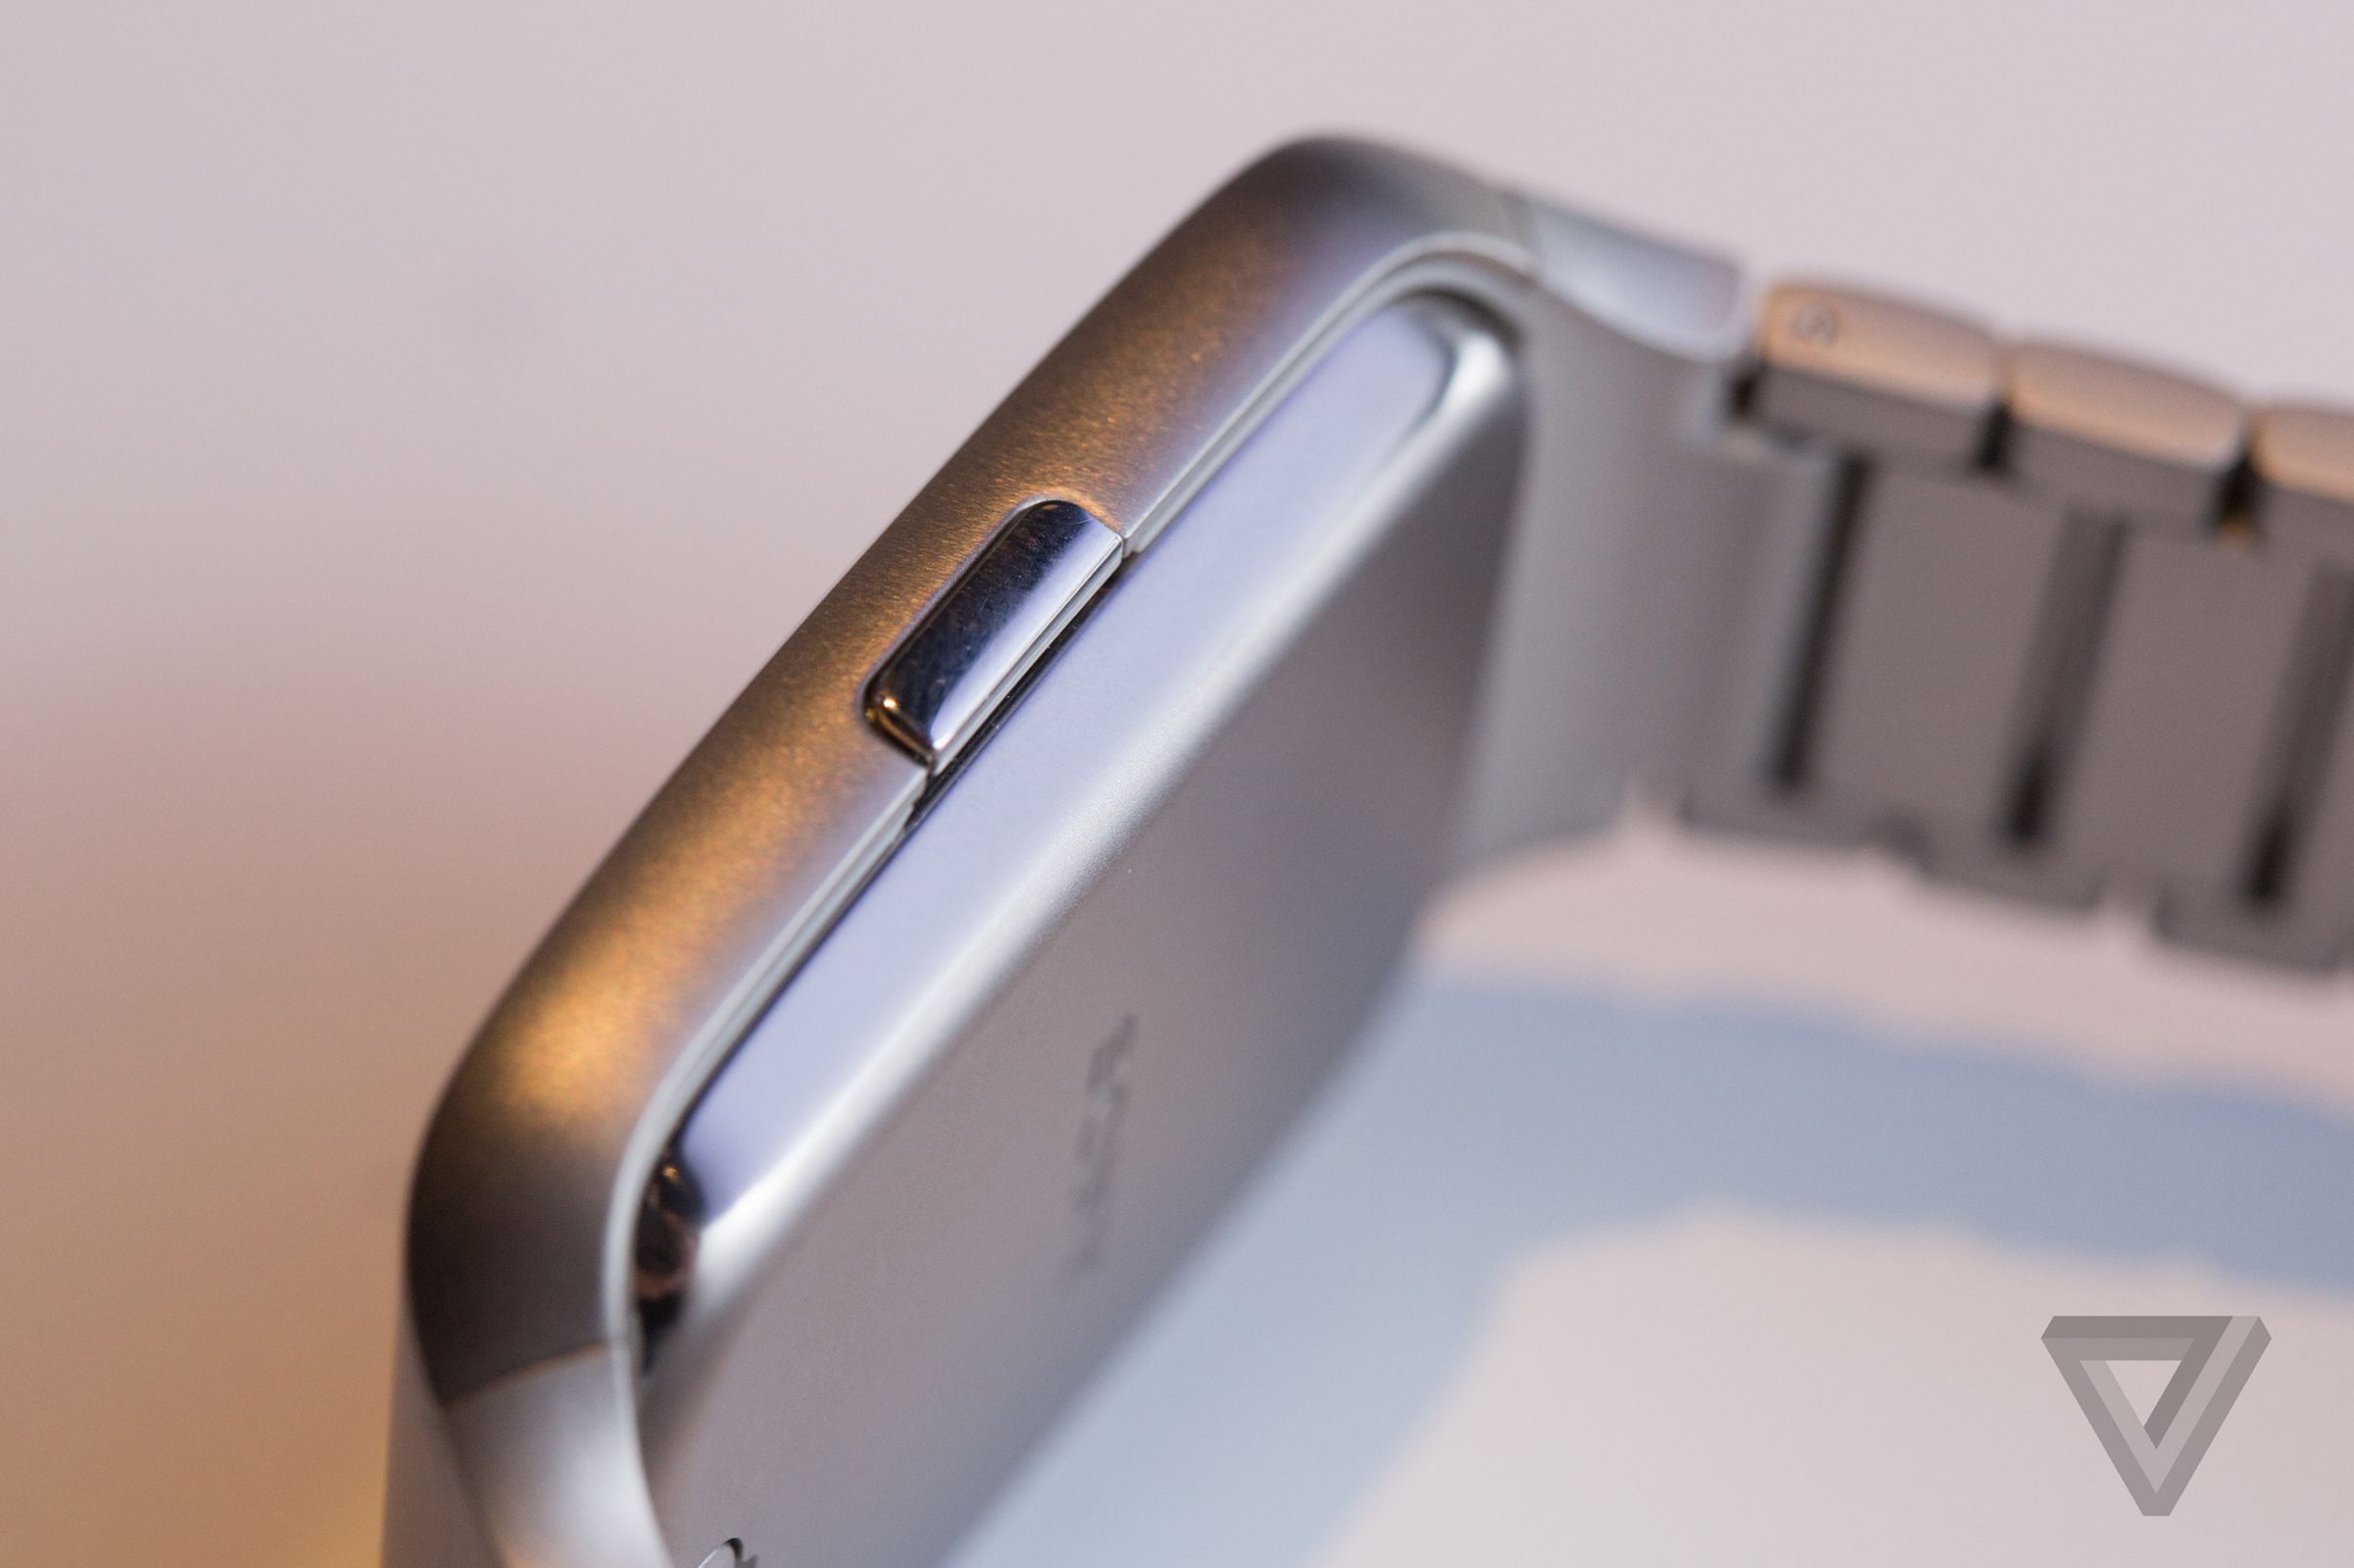 Sony SmartWatch 3 stainless steel